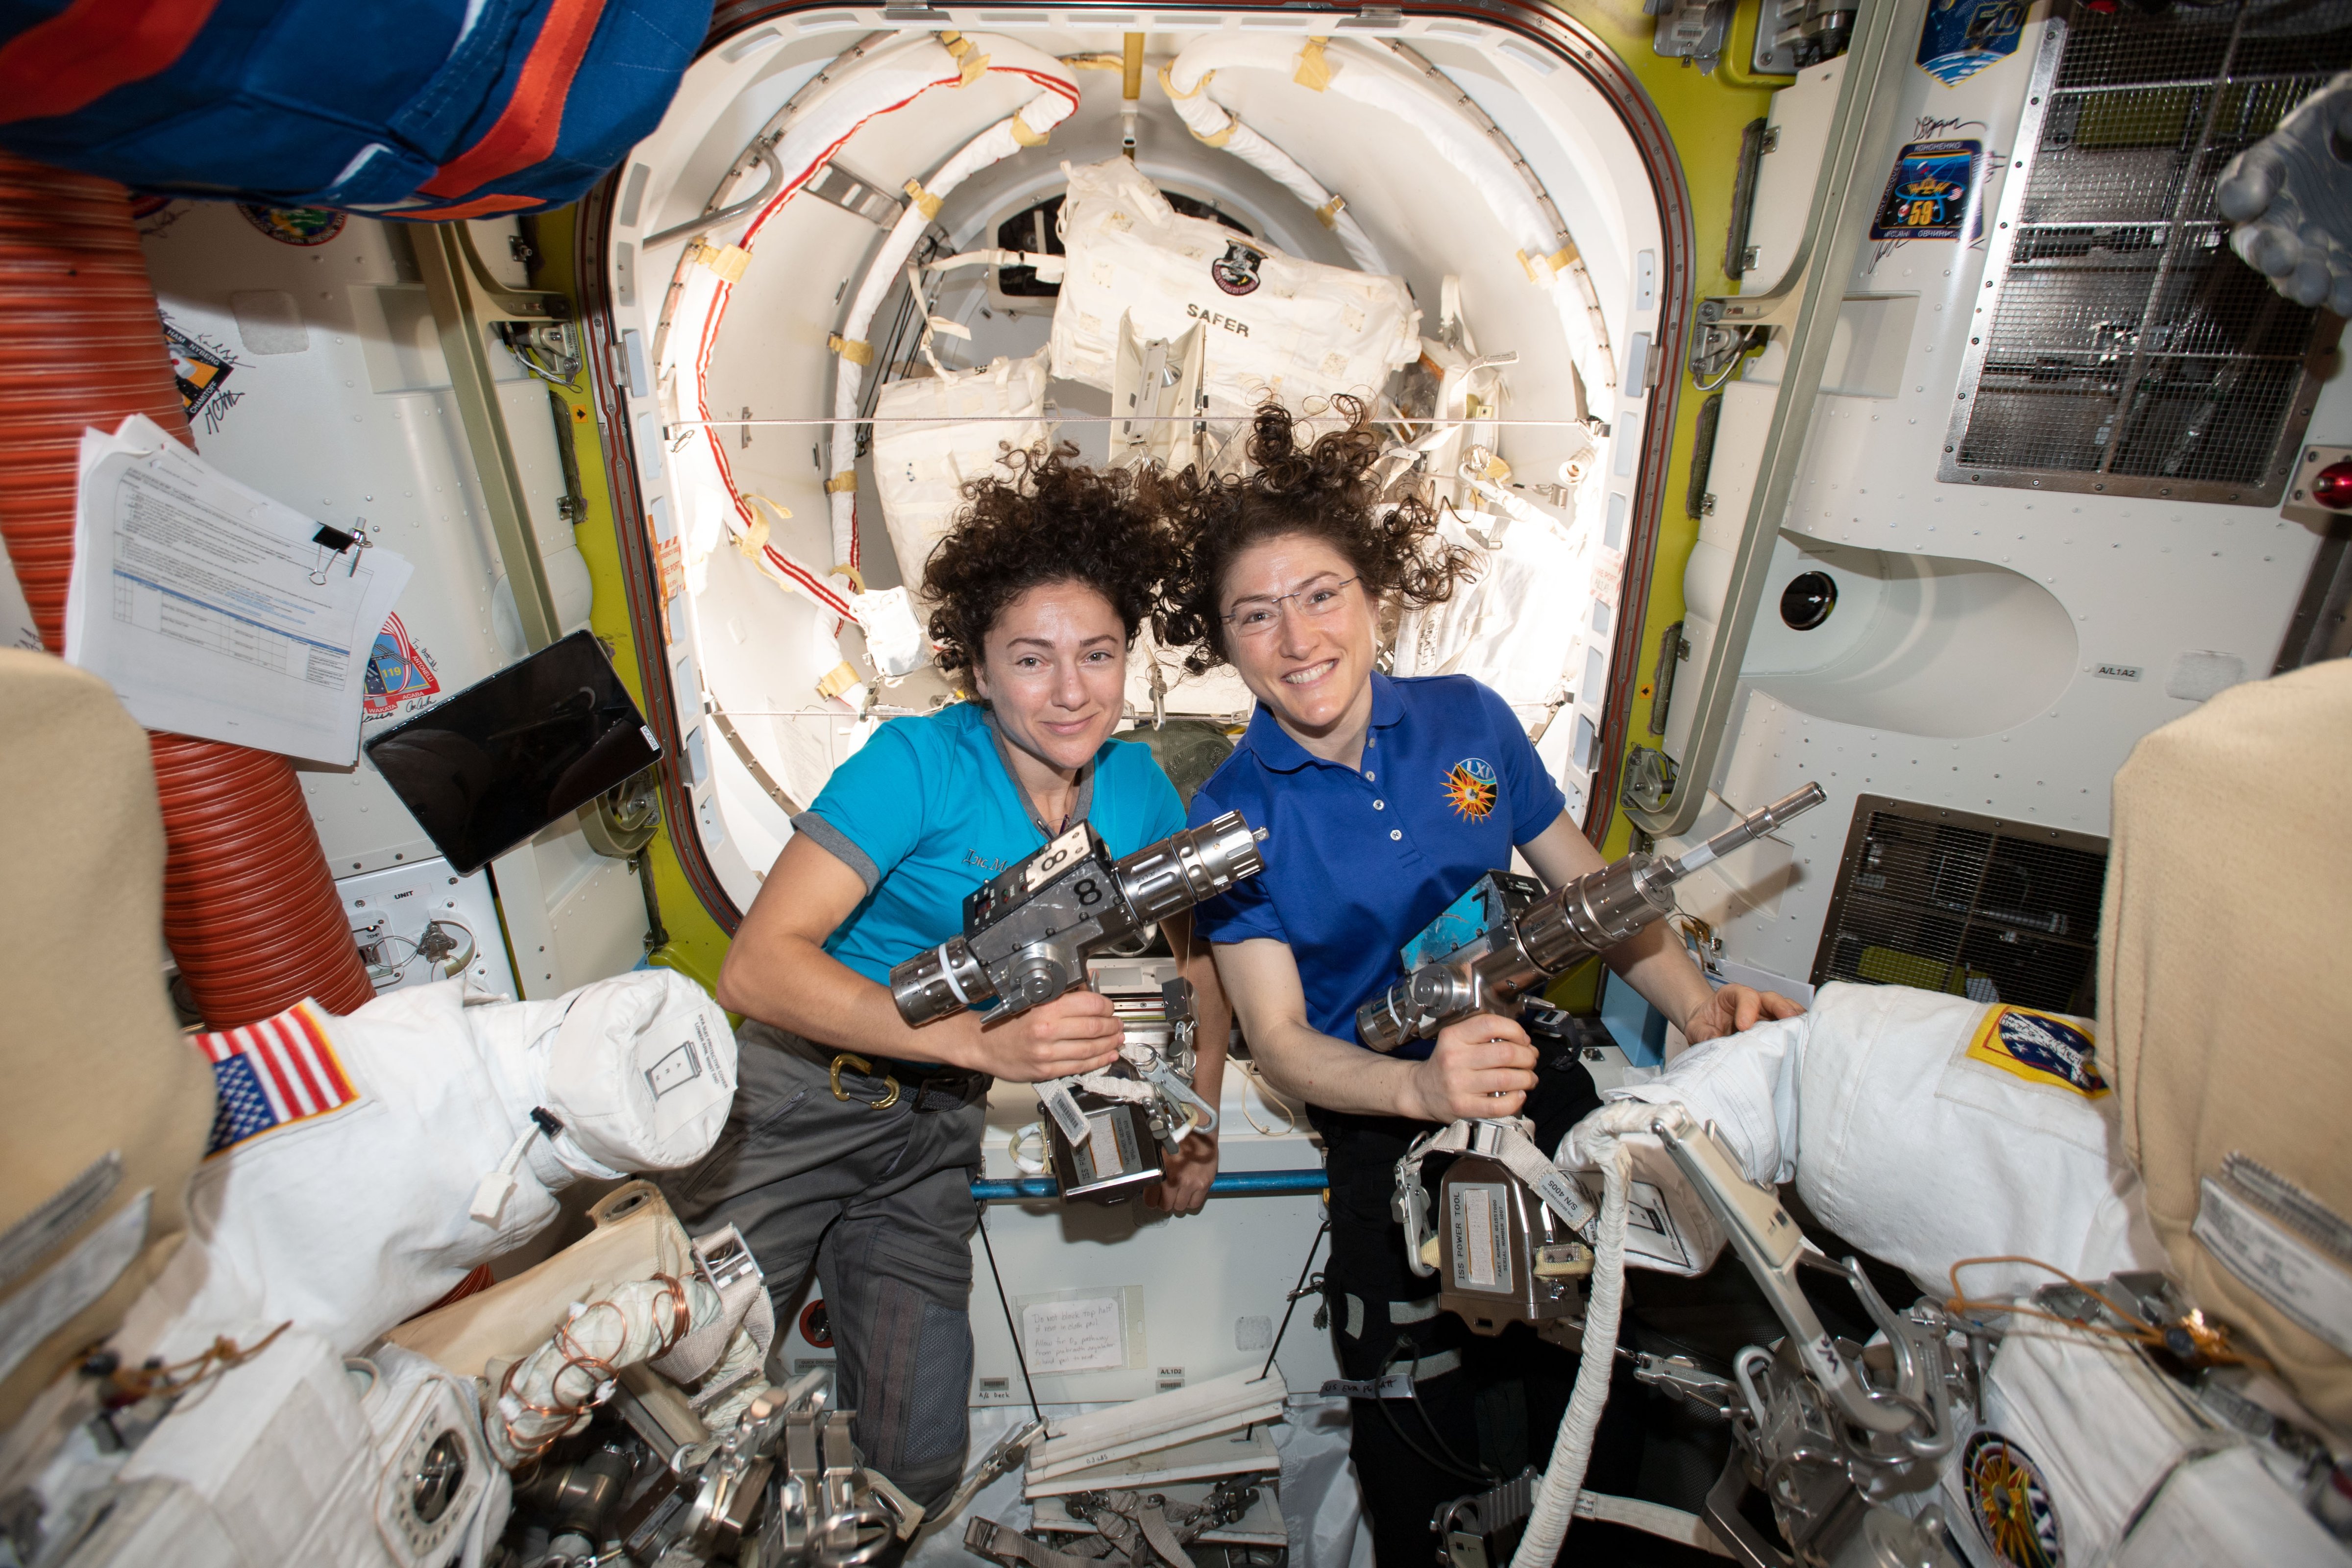 NASA astronauts Jessica Meir (left) and Christina Koch inside the Quest airlock preparing the U.S. spacesuits and tools they will use on their first spacewalk together. (NASA)